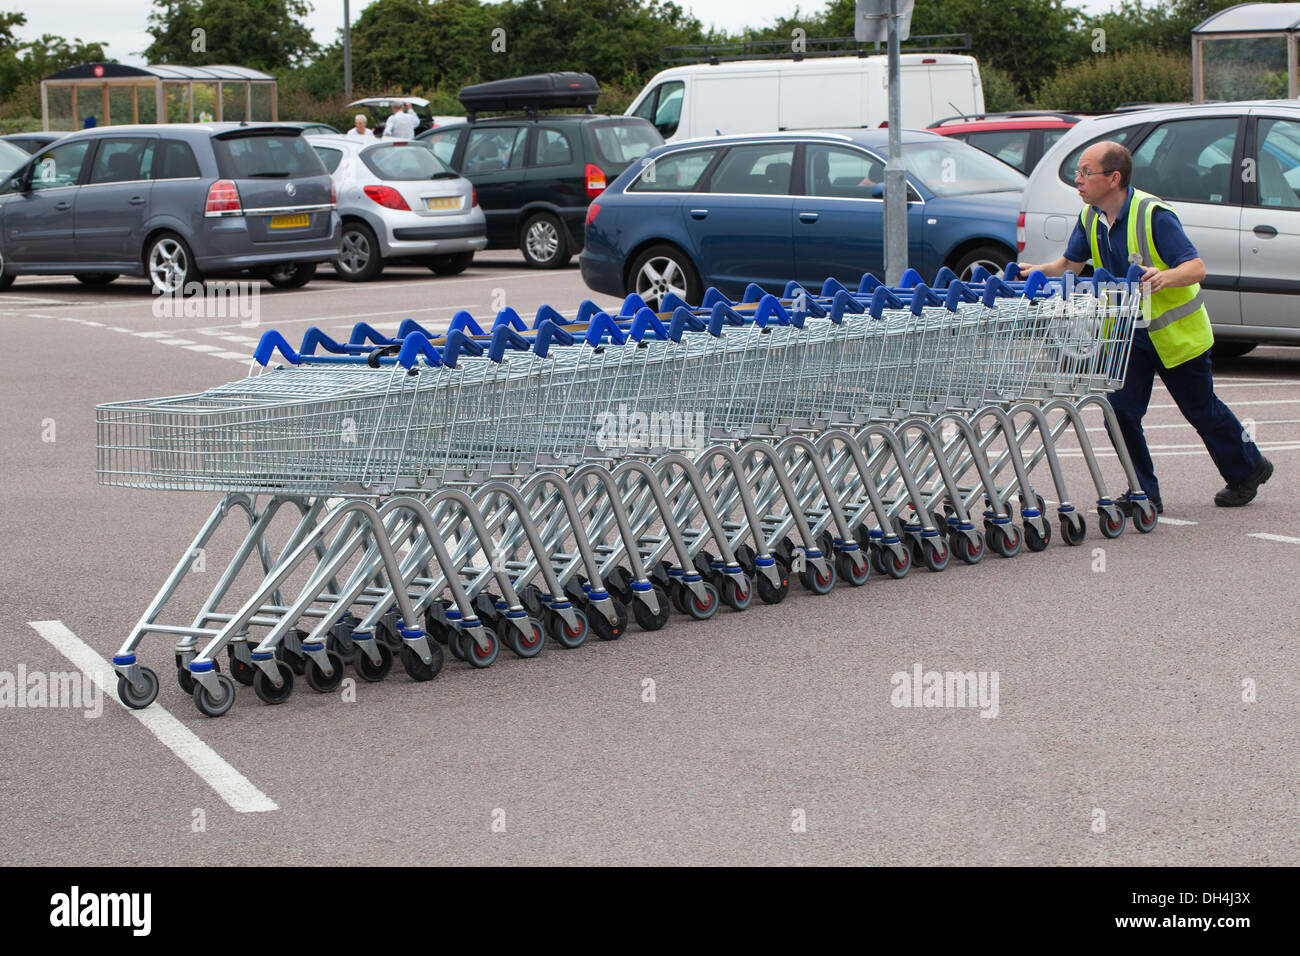 Shopping Trolleys, 23, having been emptied by customers, now being returned to borrowing bays by staff member. Stock Photo